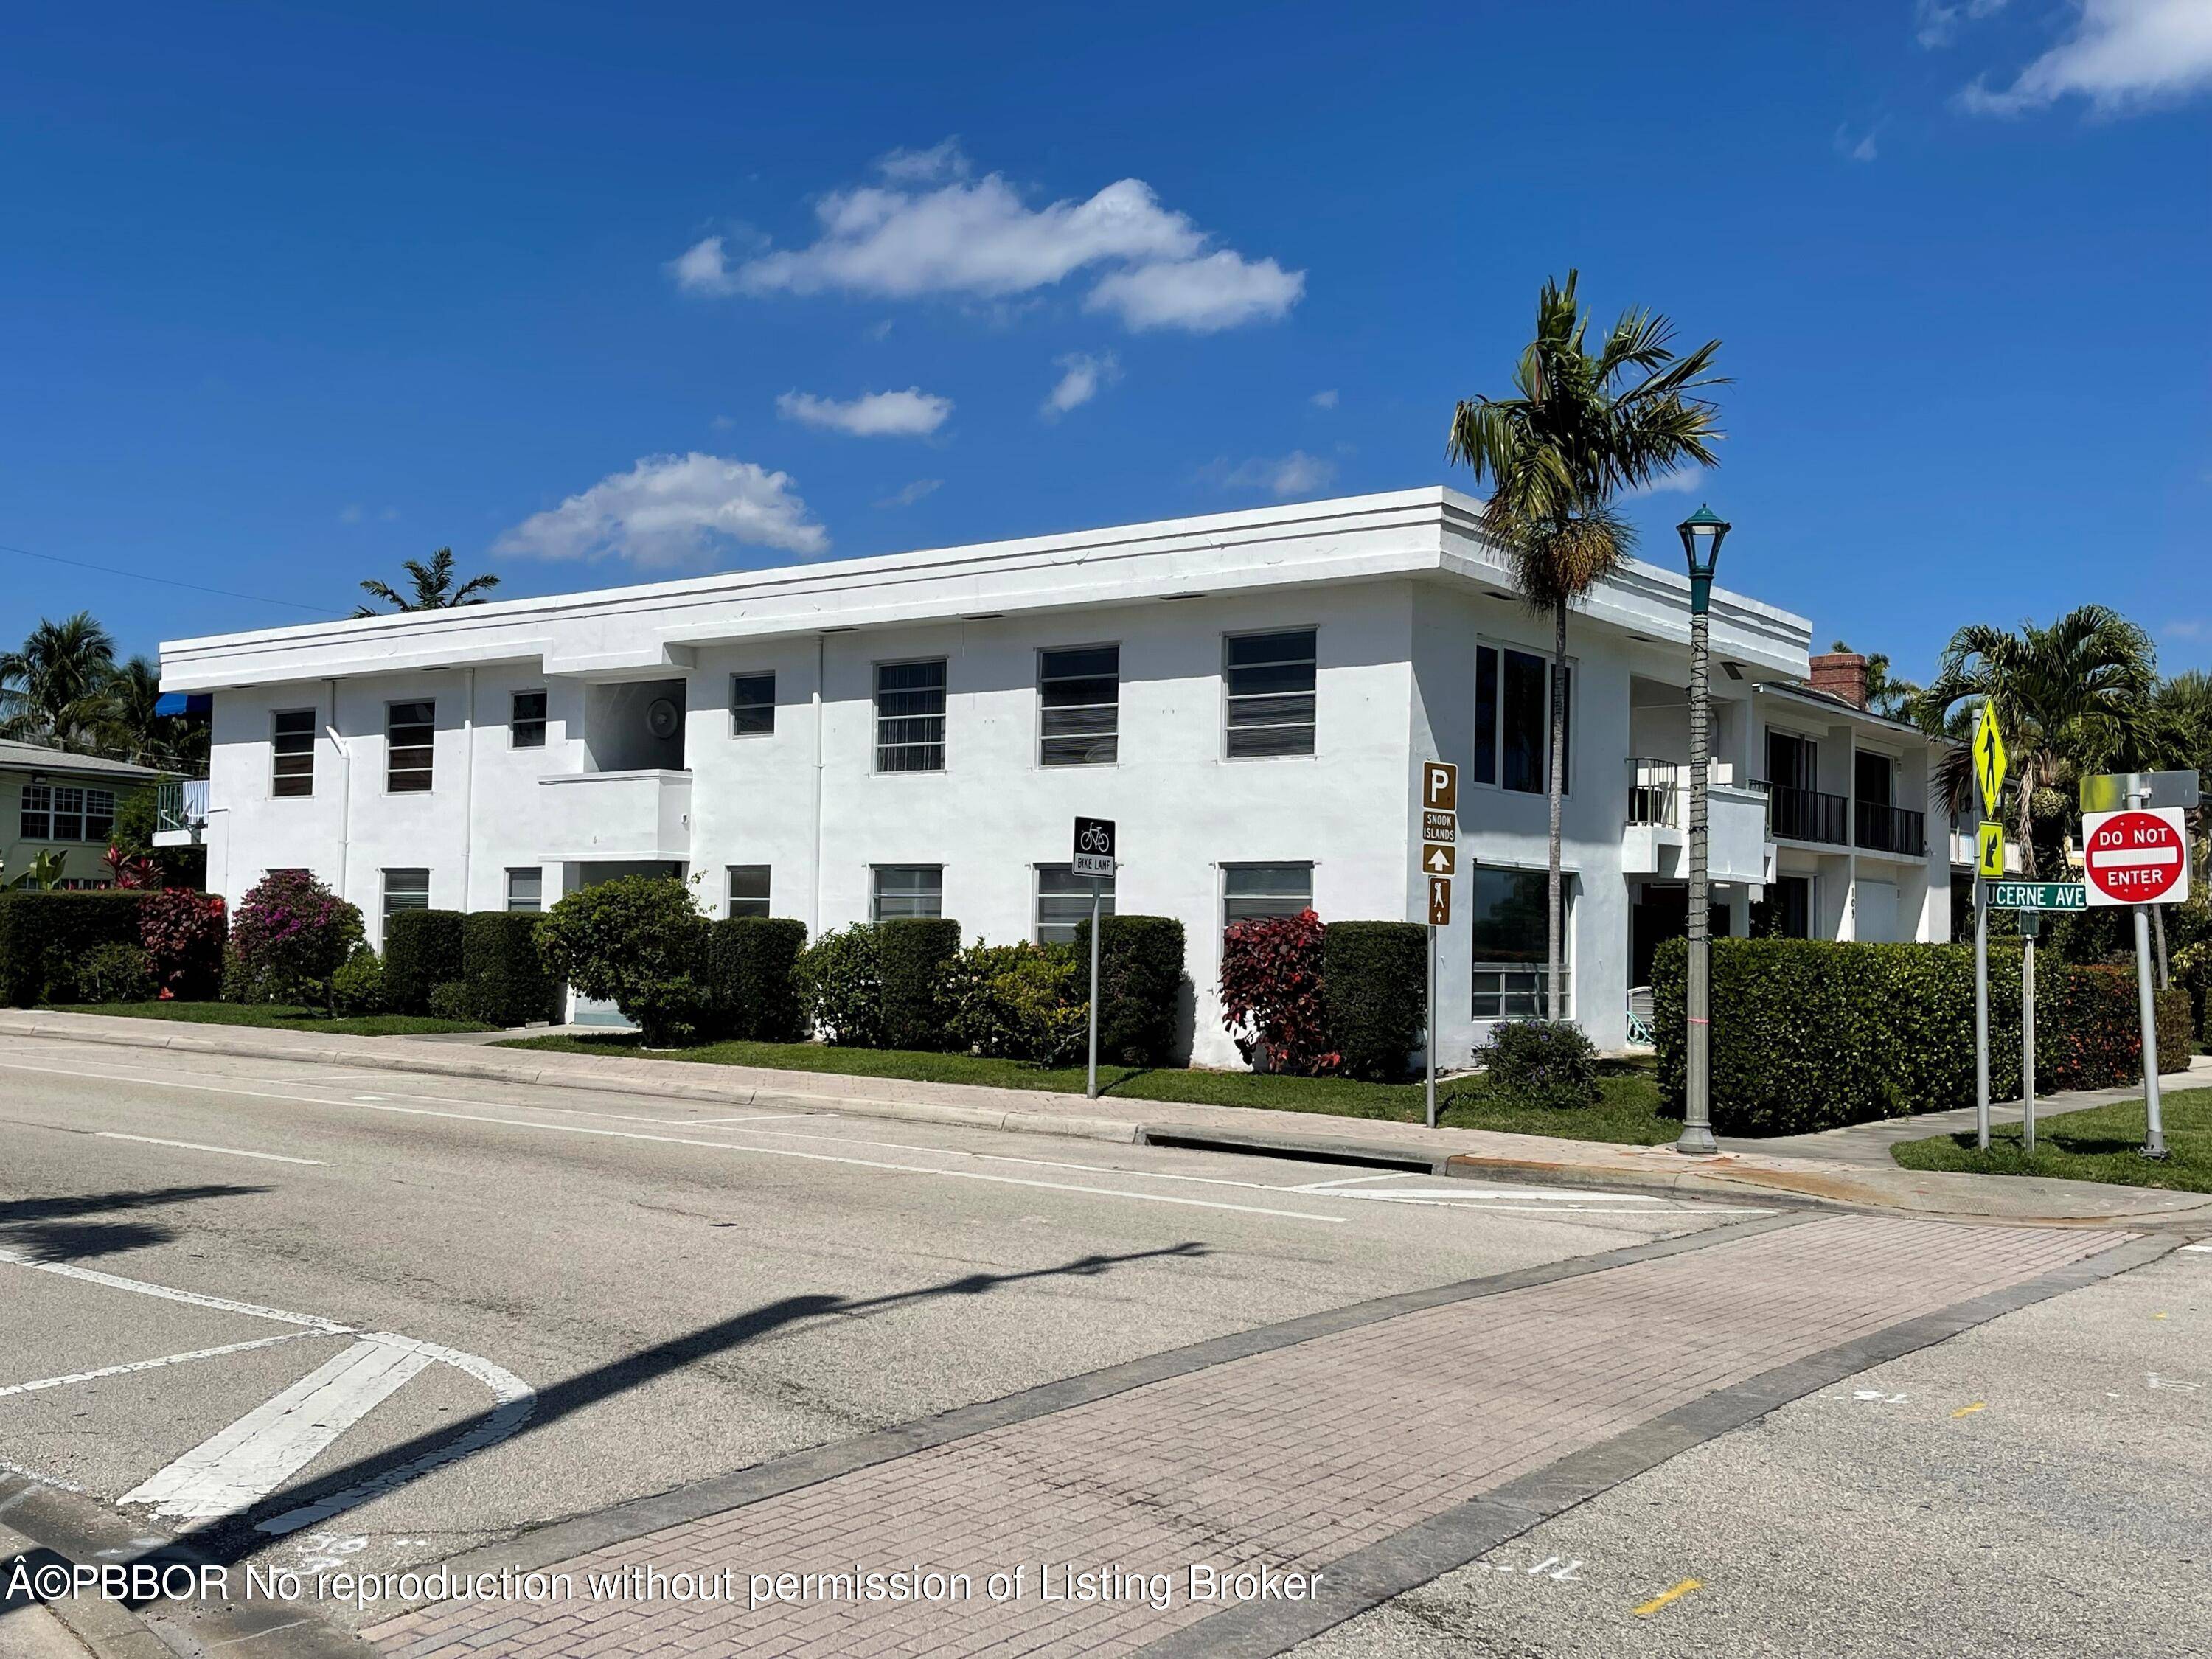 Trophy Building in Downtown LWB, across the street from the golf course Intracoastal lakeside park, the first building one encounters when crossing the bridge from Palm Beach.